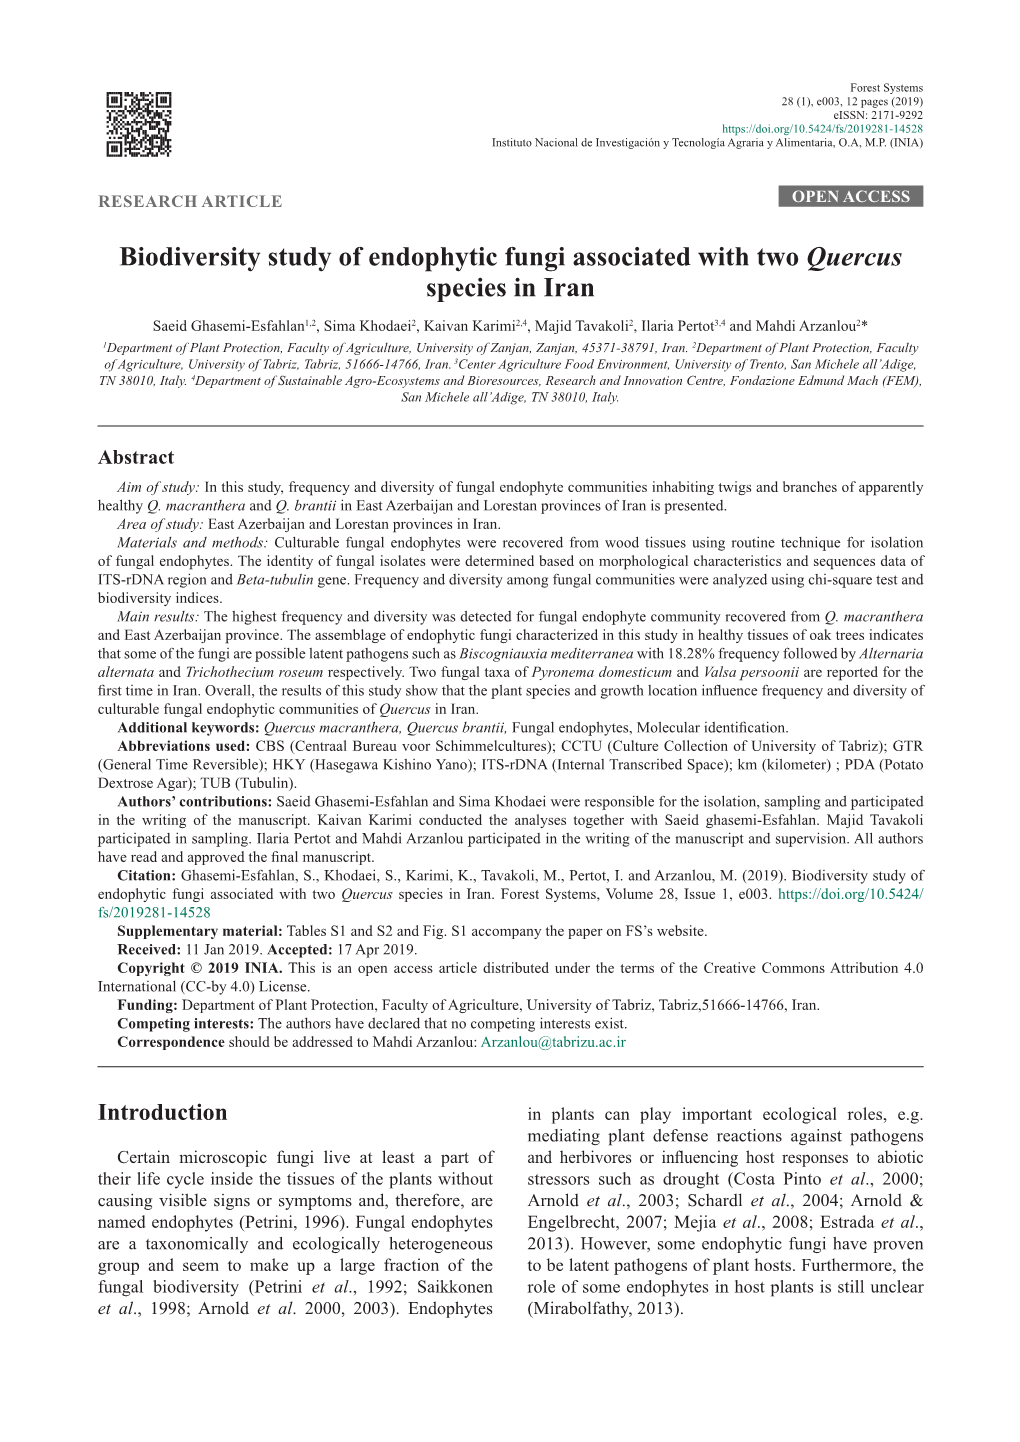 Biodiversity Study of Endophytic Fungi Associated with Two Quercus